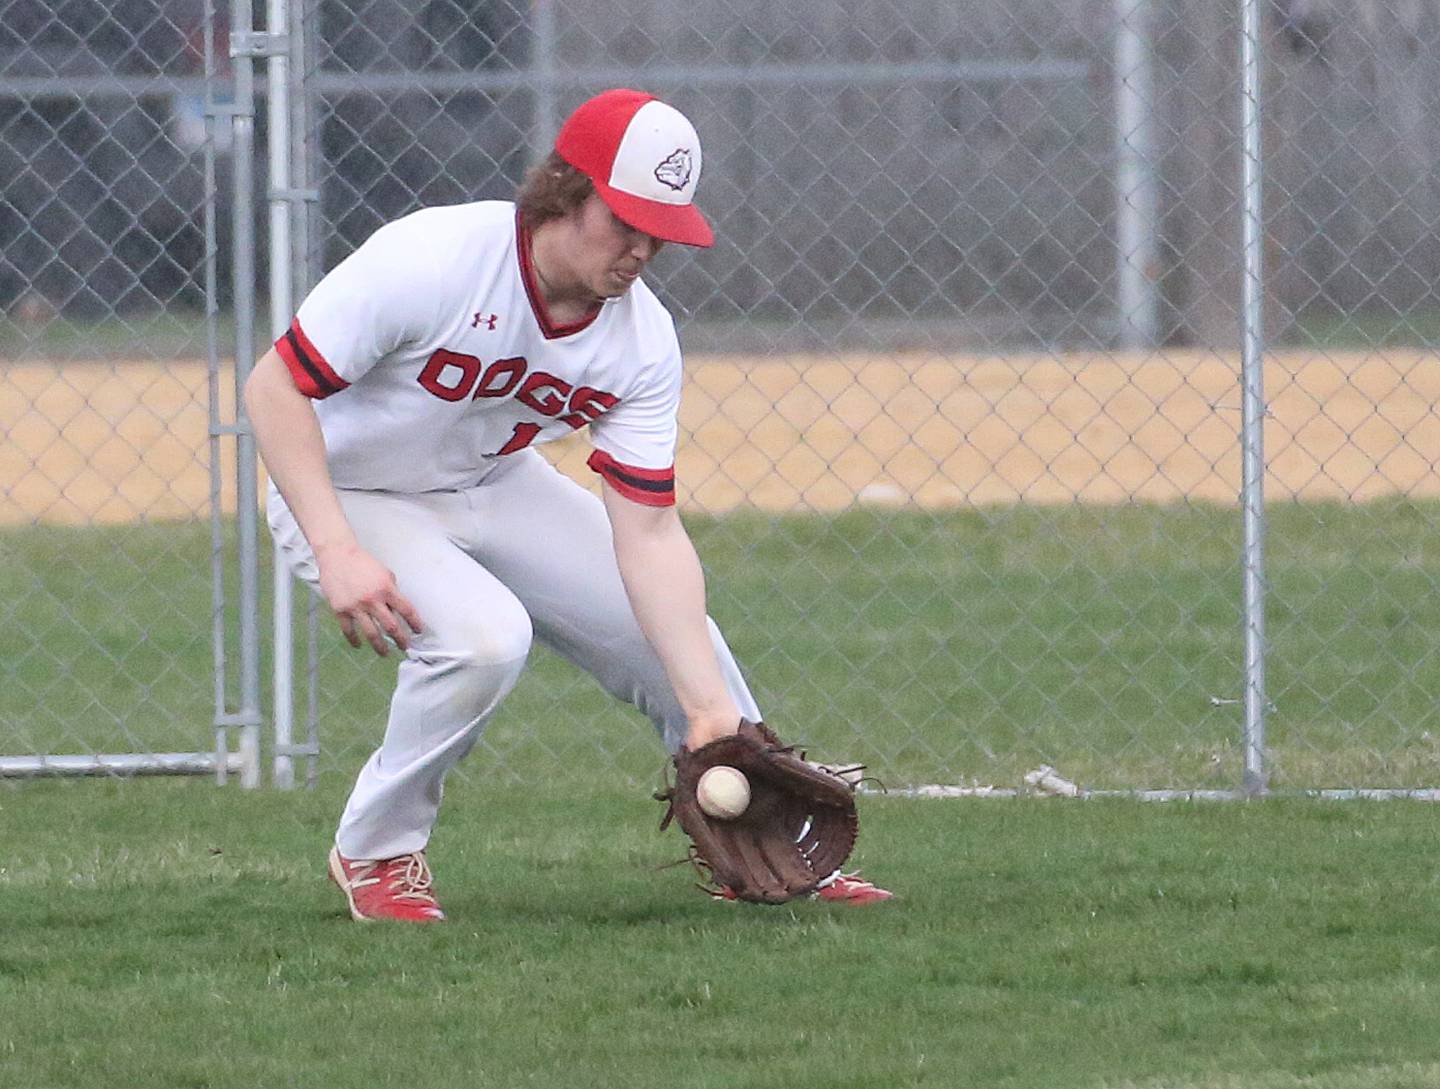 Streator's Cole Martin fields a ground ball in center field against Peotone on Tuesday, April 4, 2023 in Streator.